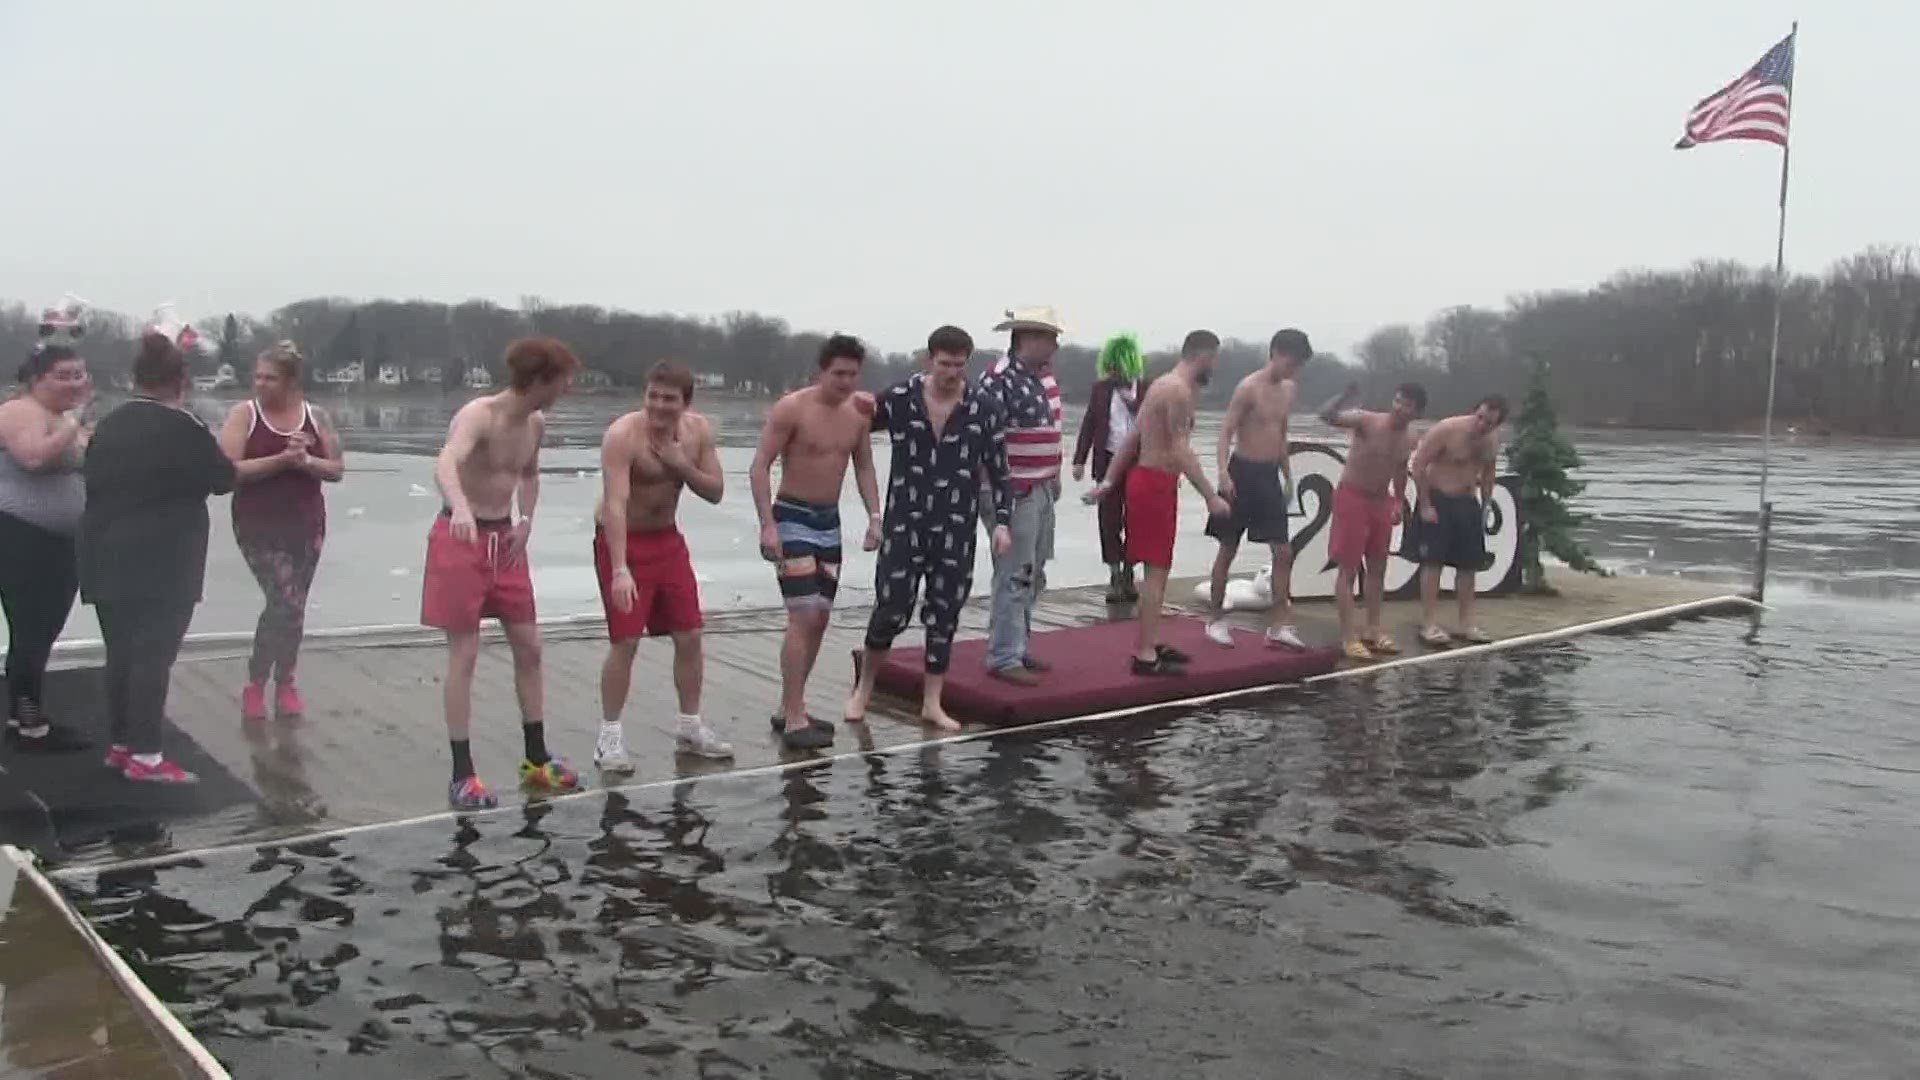 Feb. 23, 2019: Although it was a cold, cloudy winter afternoon, more than 650 people packed the beach at Portage Lakes State Park to go for an icy swim. These brave souls traded their winter coats for bathing suits and flip-flops Saturday at the 16th annual Portage Lakes Polar Bear Jump, which raised more than $125,000 for the Akron-Canton Regional Foodbank.